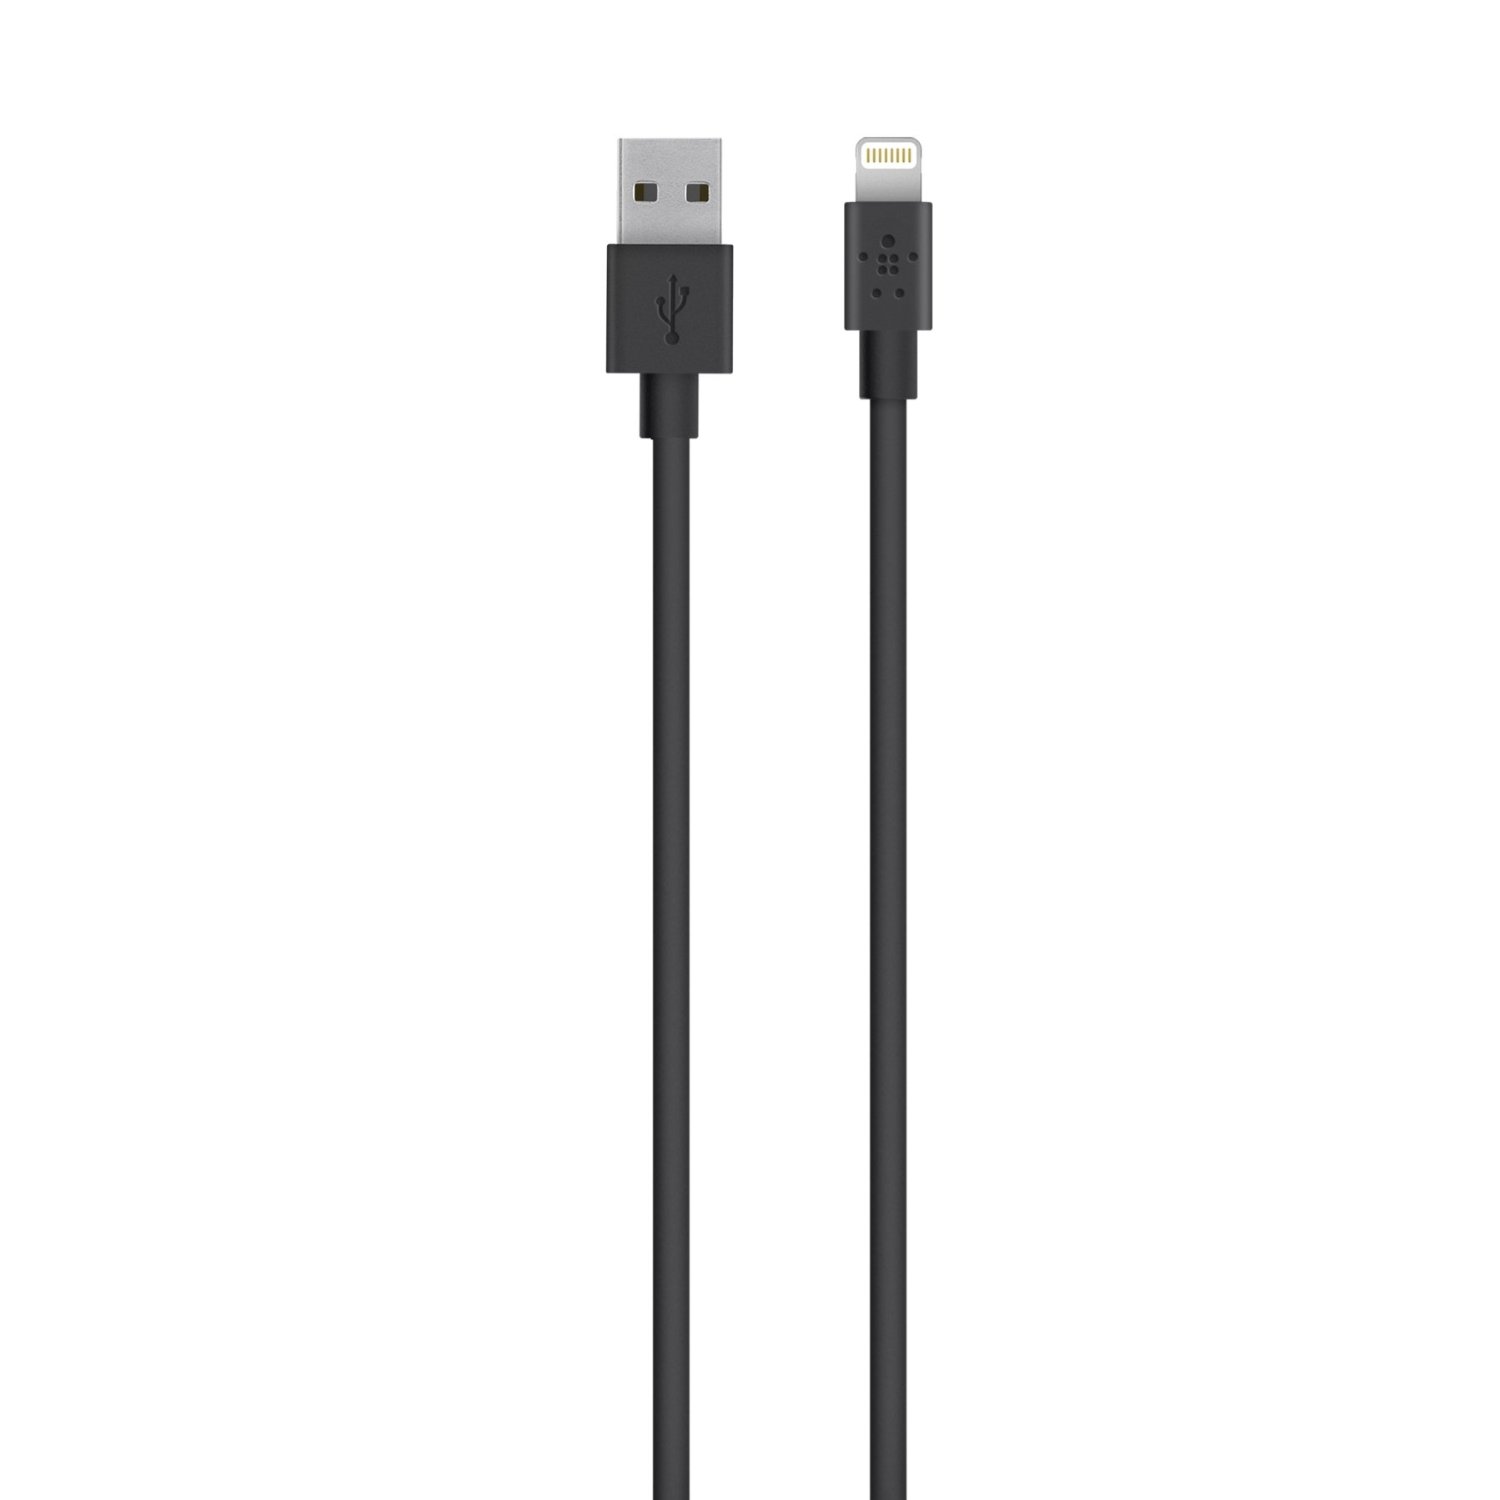 CABLE BELKIN LIGHTNING A USB PARA APPLE MFI COMPATIBLE CON IPHONE 4FT